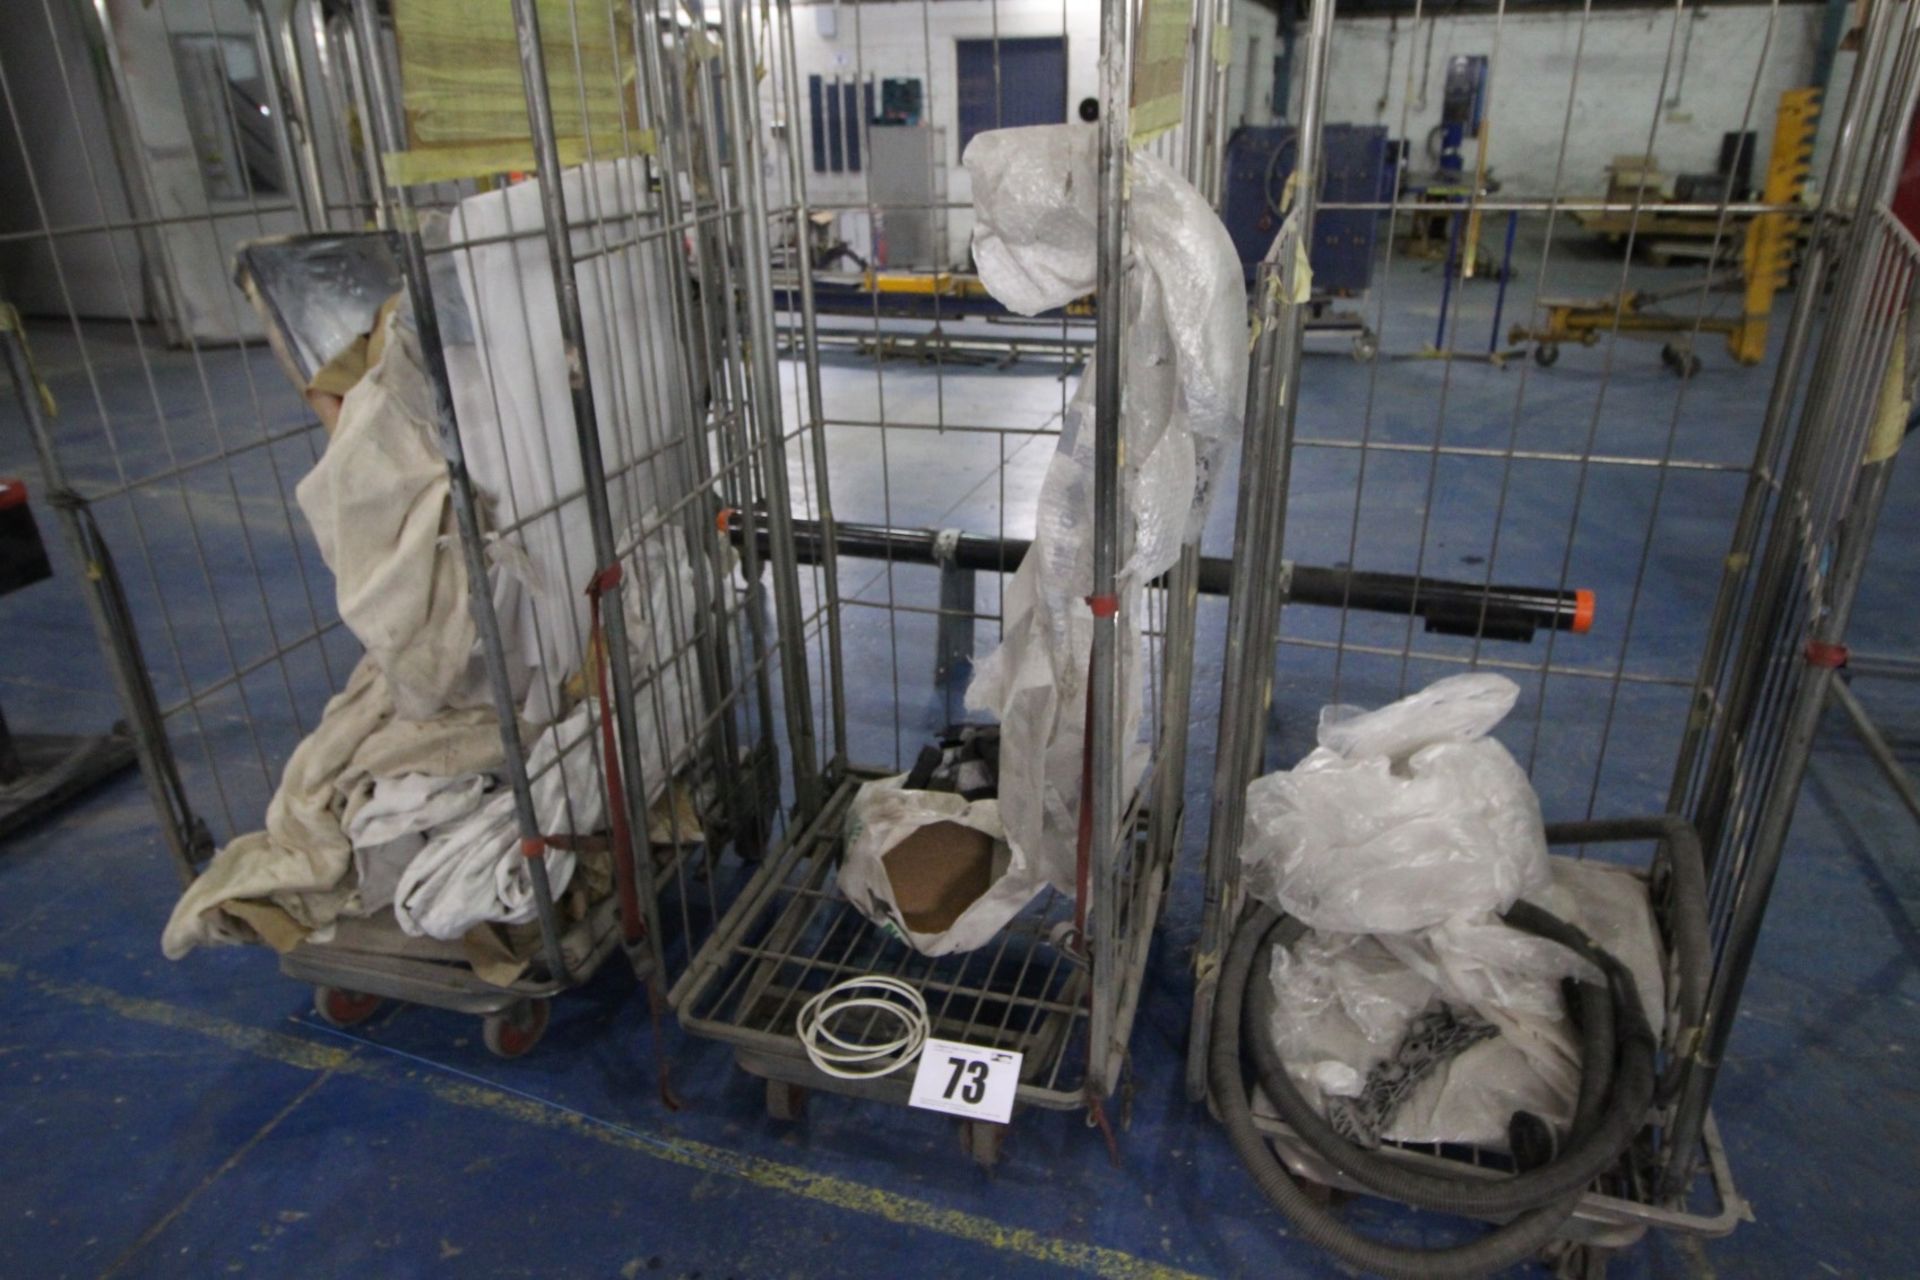 3x RETAIL-STYLE, STOCK TROLLEYS, AND CONTENTS OF MISCELLANEOUS, OIL-ABSORBENT, DUST SHEETS, ETC